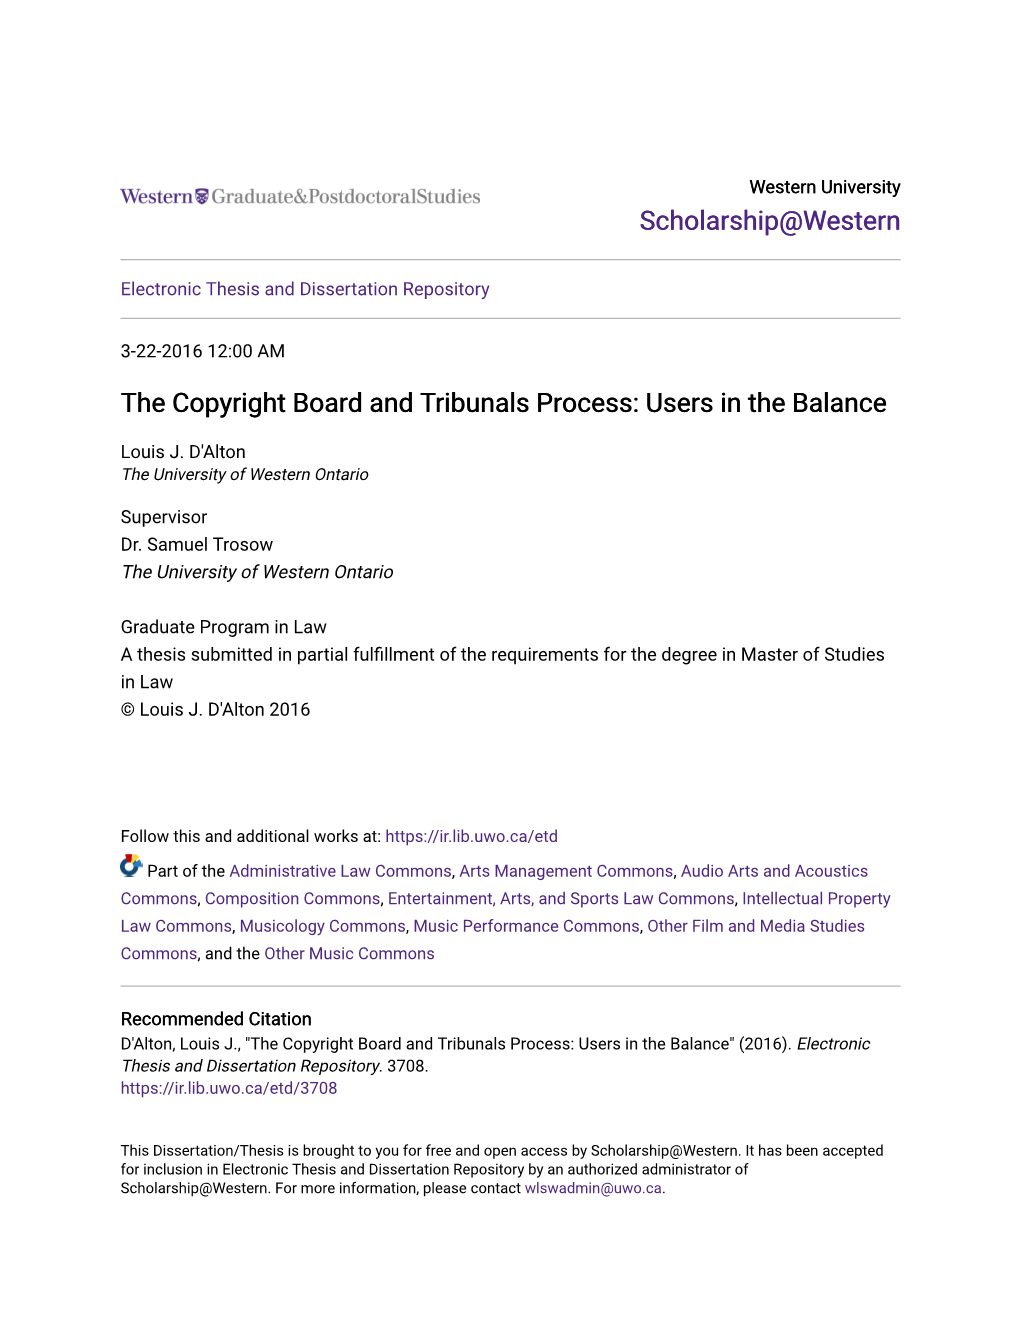 The Copyright Board and Tribunals Process: Users in the Balance